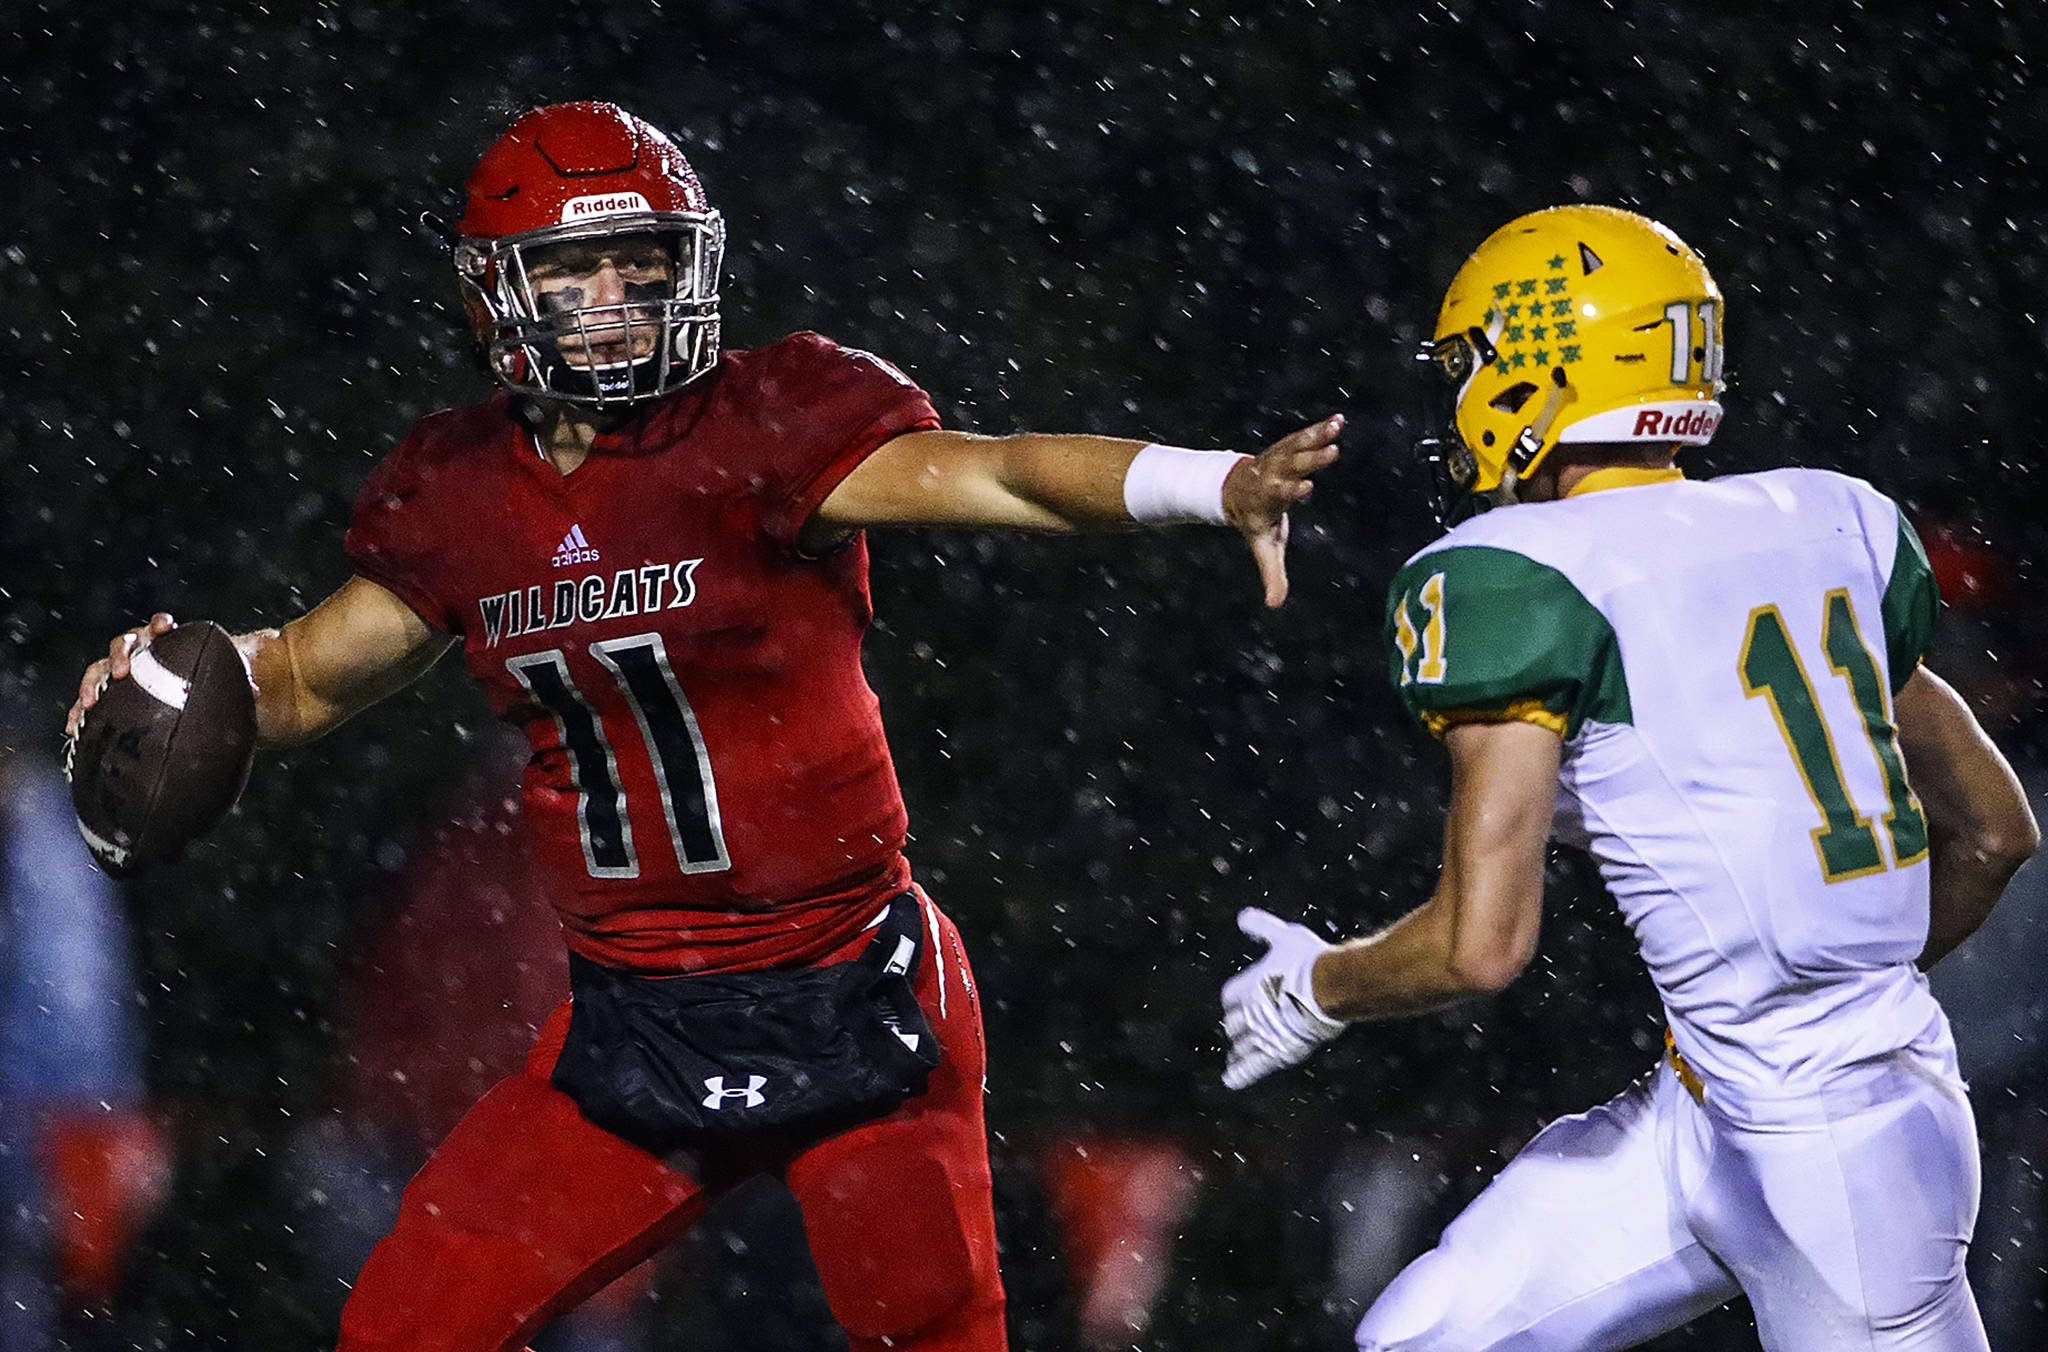 Archbishop Murphy’s Victor Gabalis is chased out of the pocket by Lynden’s Elijah Lyons in the first quarter of a game on Sept. 27, 2019, at Archbishop Murphy High School in Everett. (Kevin Clark / The Herald)